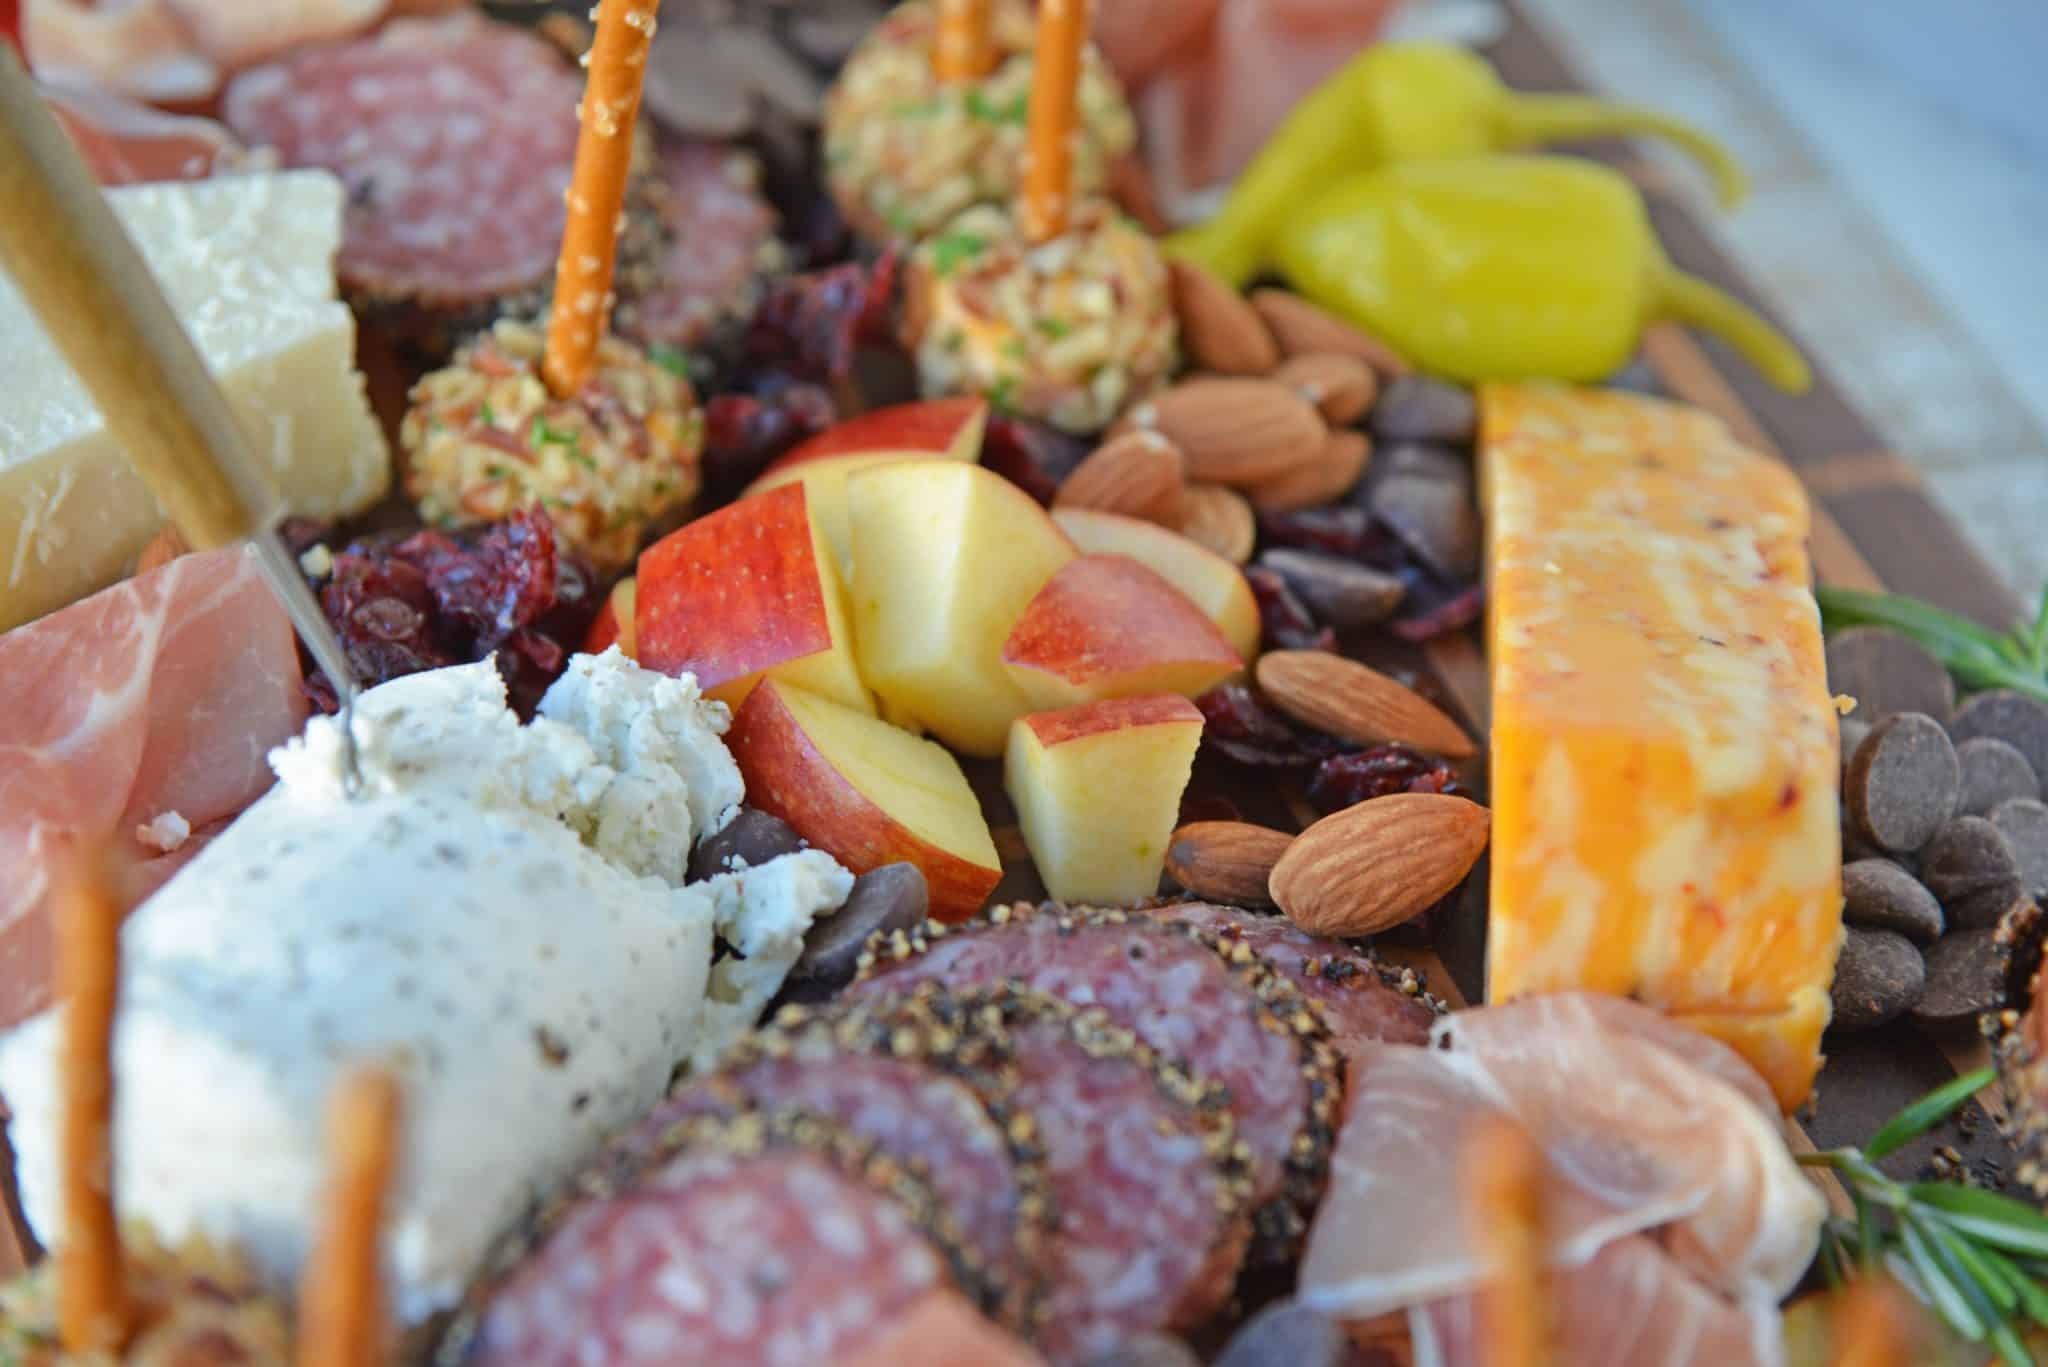 Tips for building the ultimate cheese board, the perfect easy party appetizer that requires no cooking! Ideas for meat, cheese and accompaniments. #cheeseboard #cheeseplatter www.savoryexperiments.com 